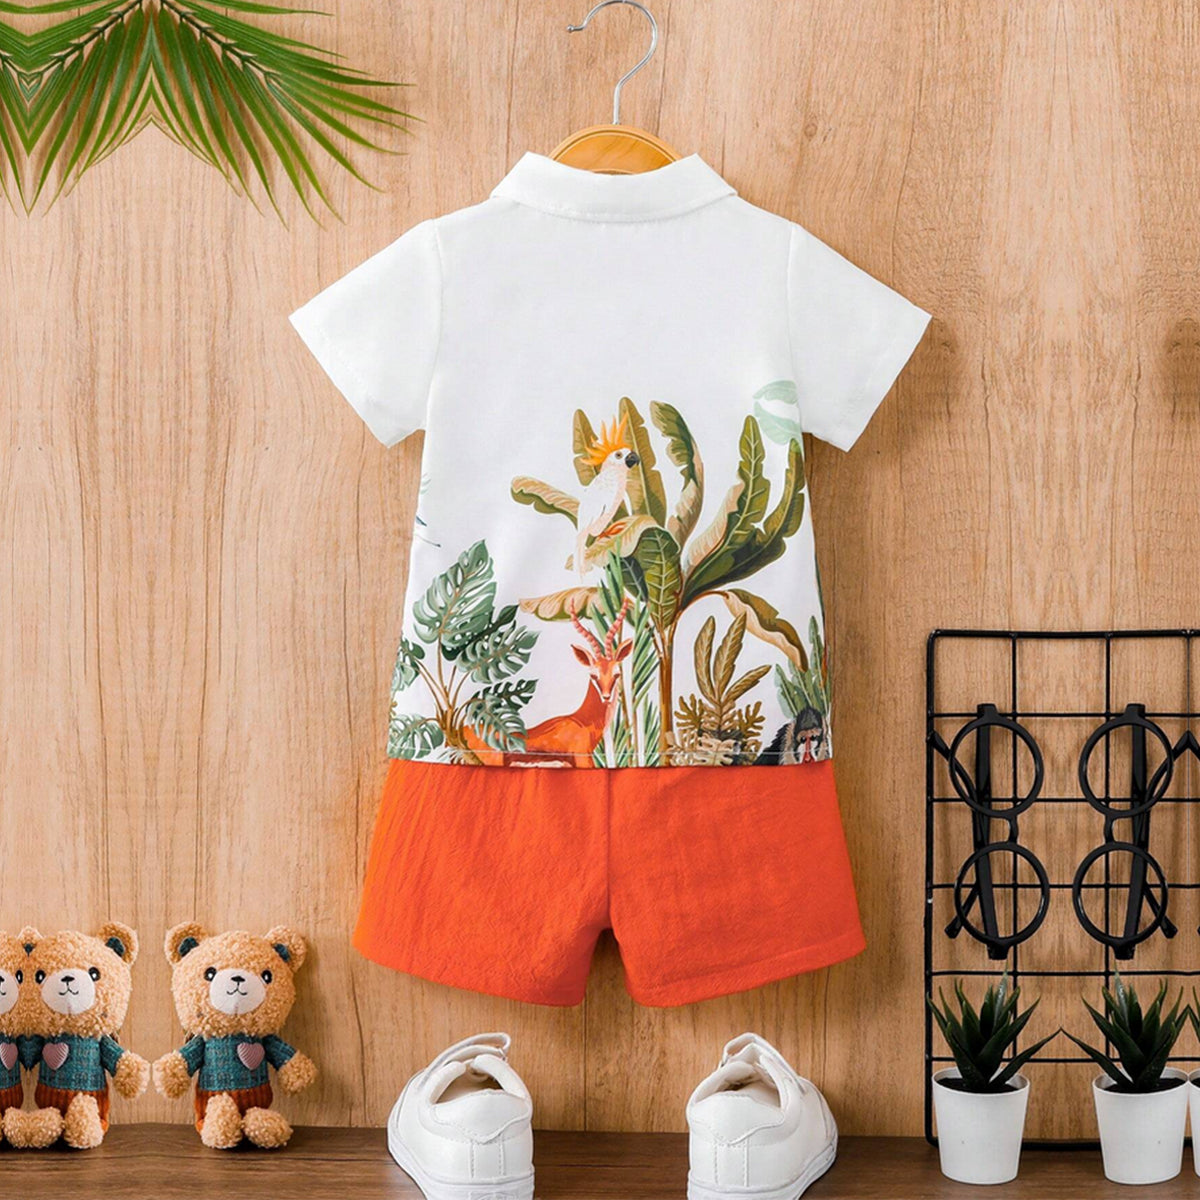 Venutaloza Baby Set Animals (Combo Pack Of 2) Shirt & Shorts Without tee Two Piece Set For Boy & Girls.